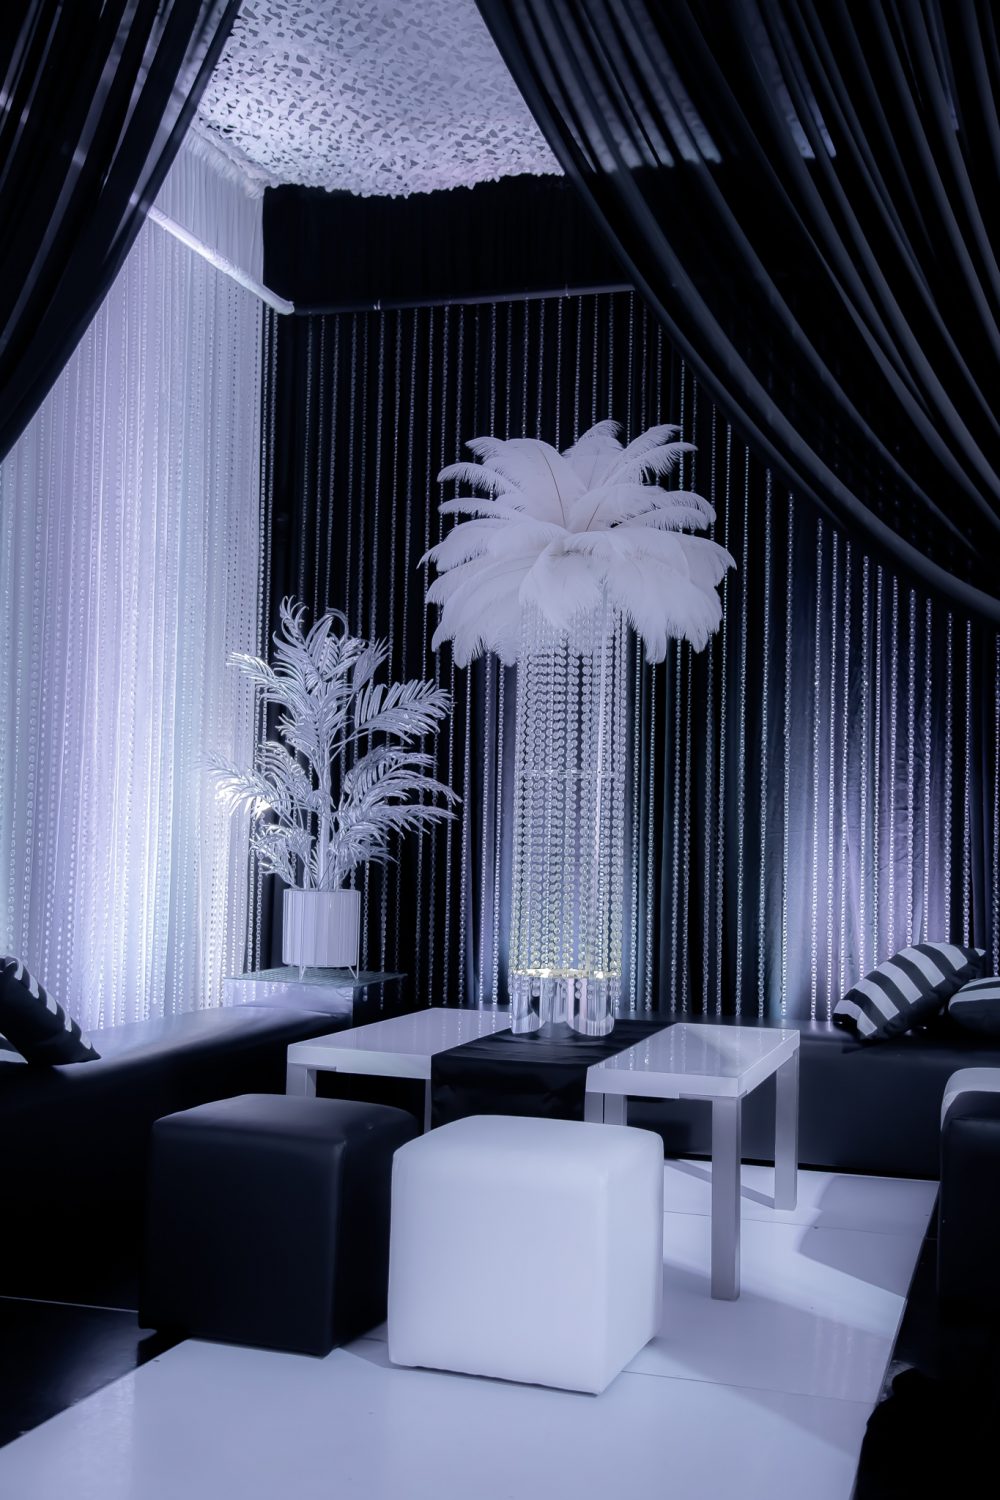 black and white themed event lounge area with ottomans and centrepieces